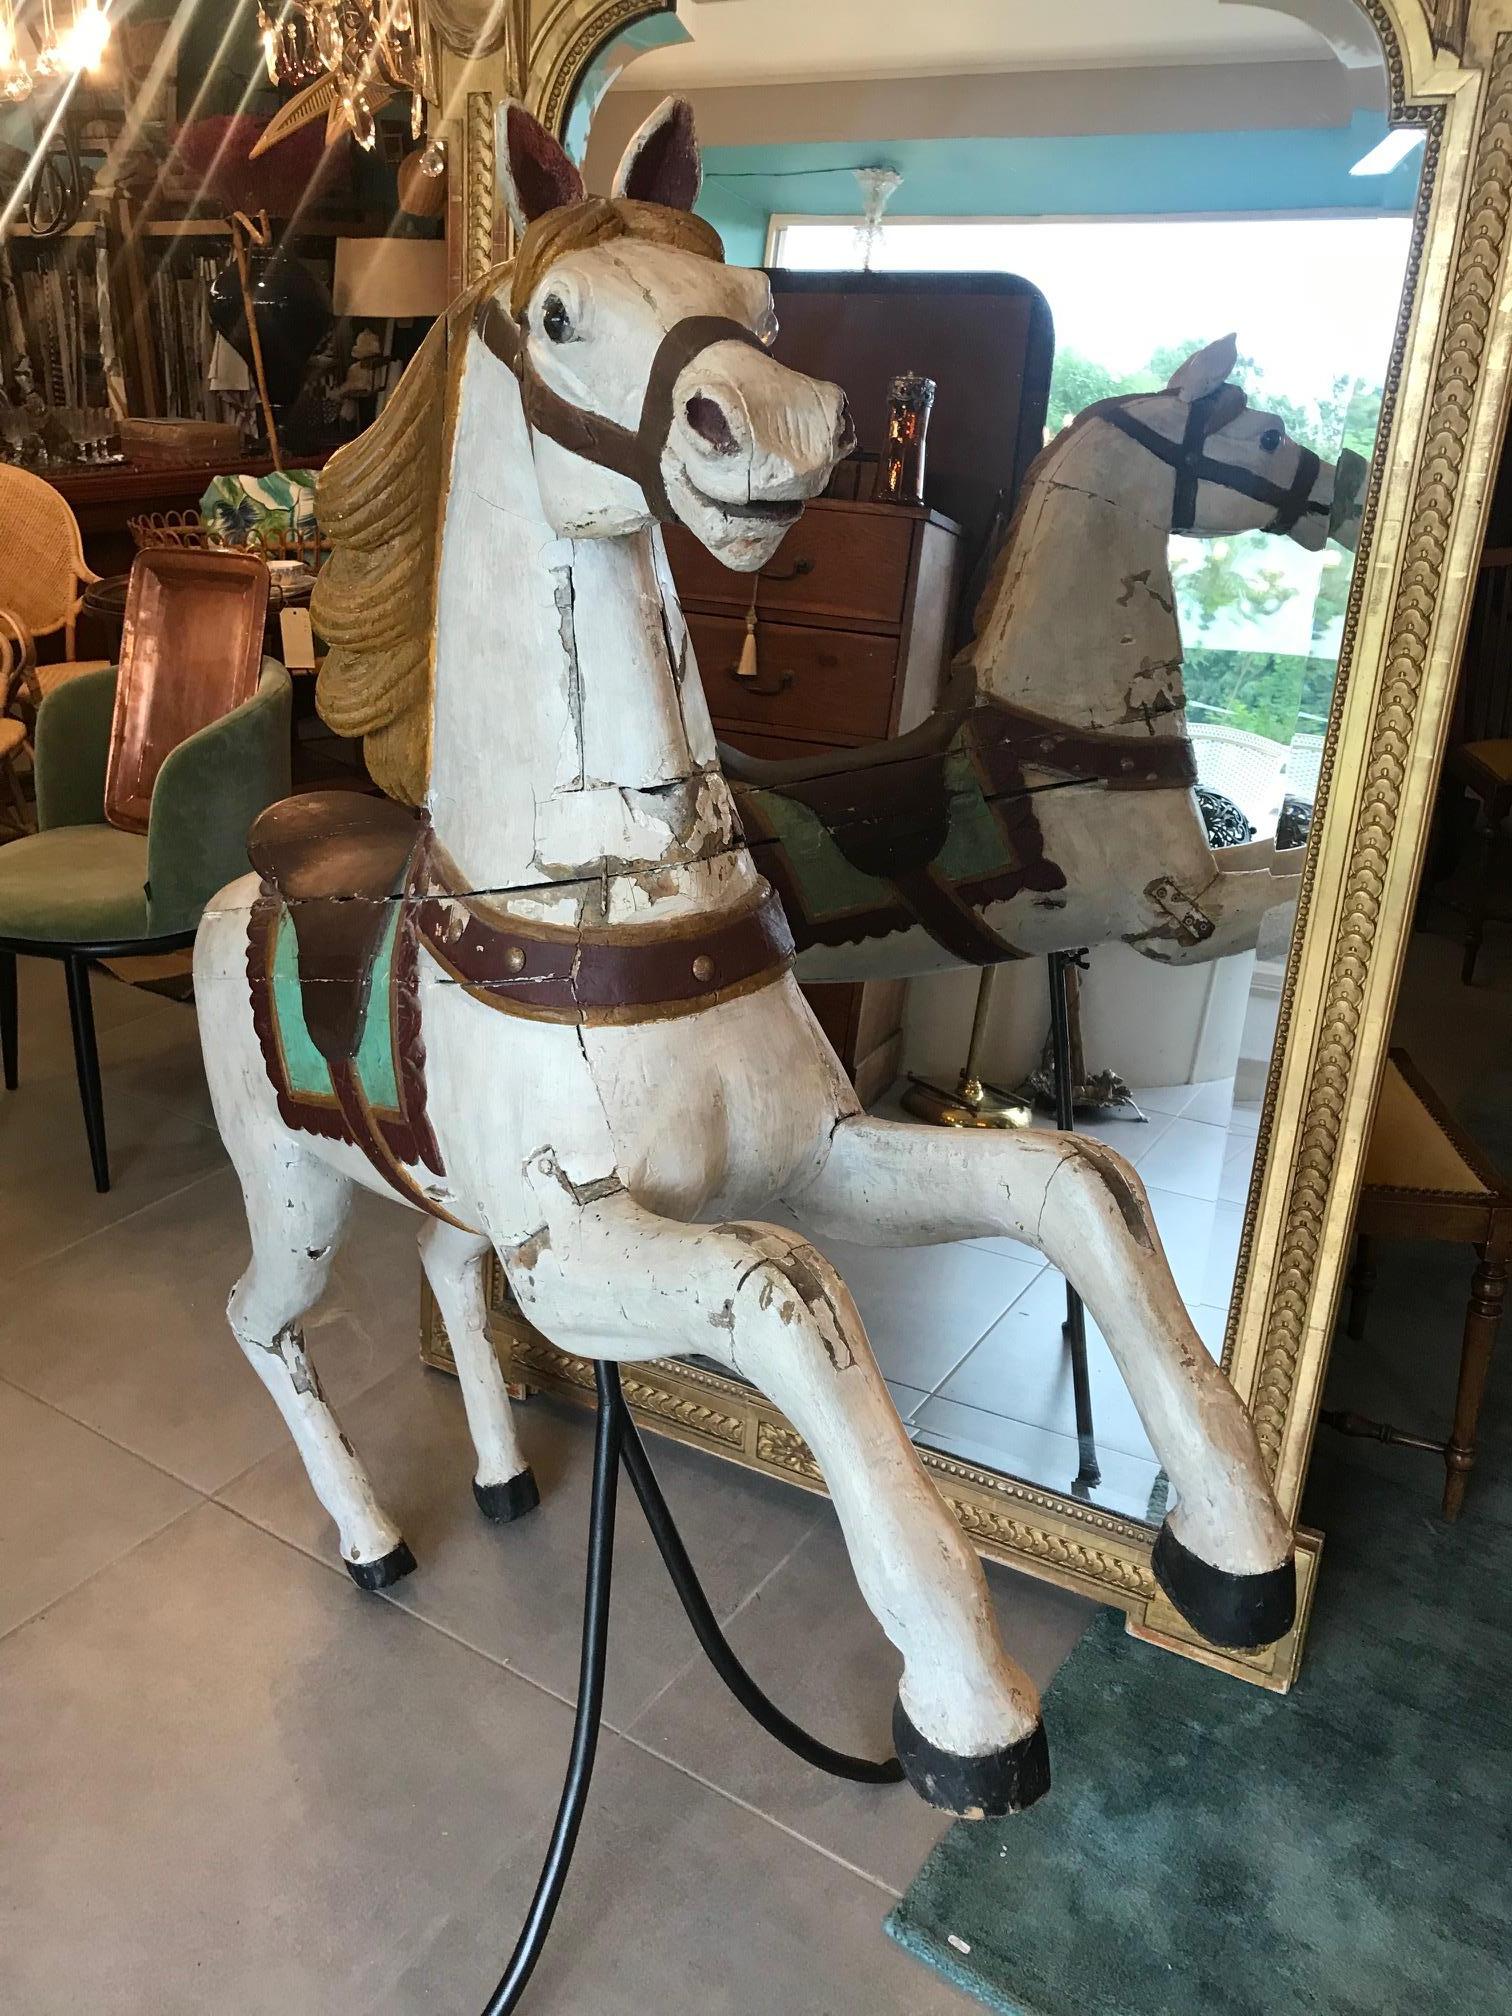 Beautiful 19th century French painted wood carousel Horse from the 1850s.
White painted wooden horse on a metal base (made for this horse) that can be removable and height adjustable. Sulphide eyes. Removable pony tail horsehair.
Show some painted